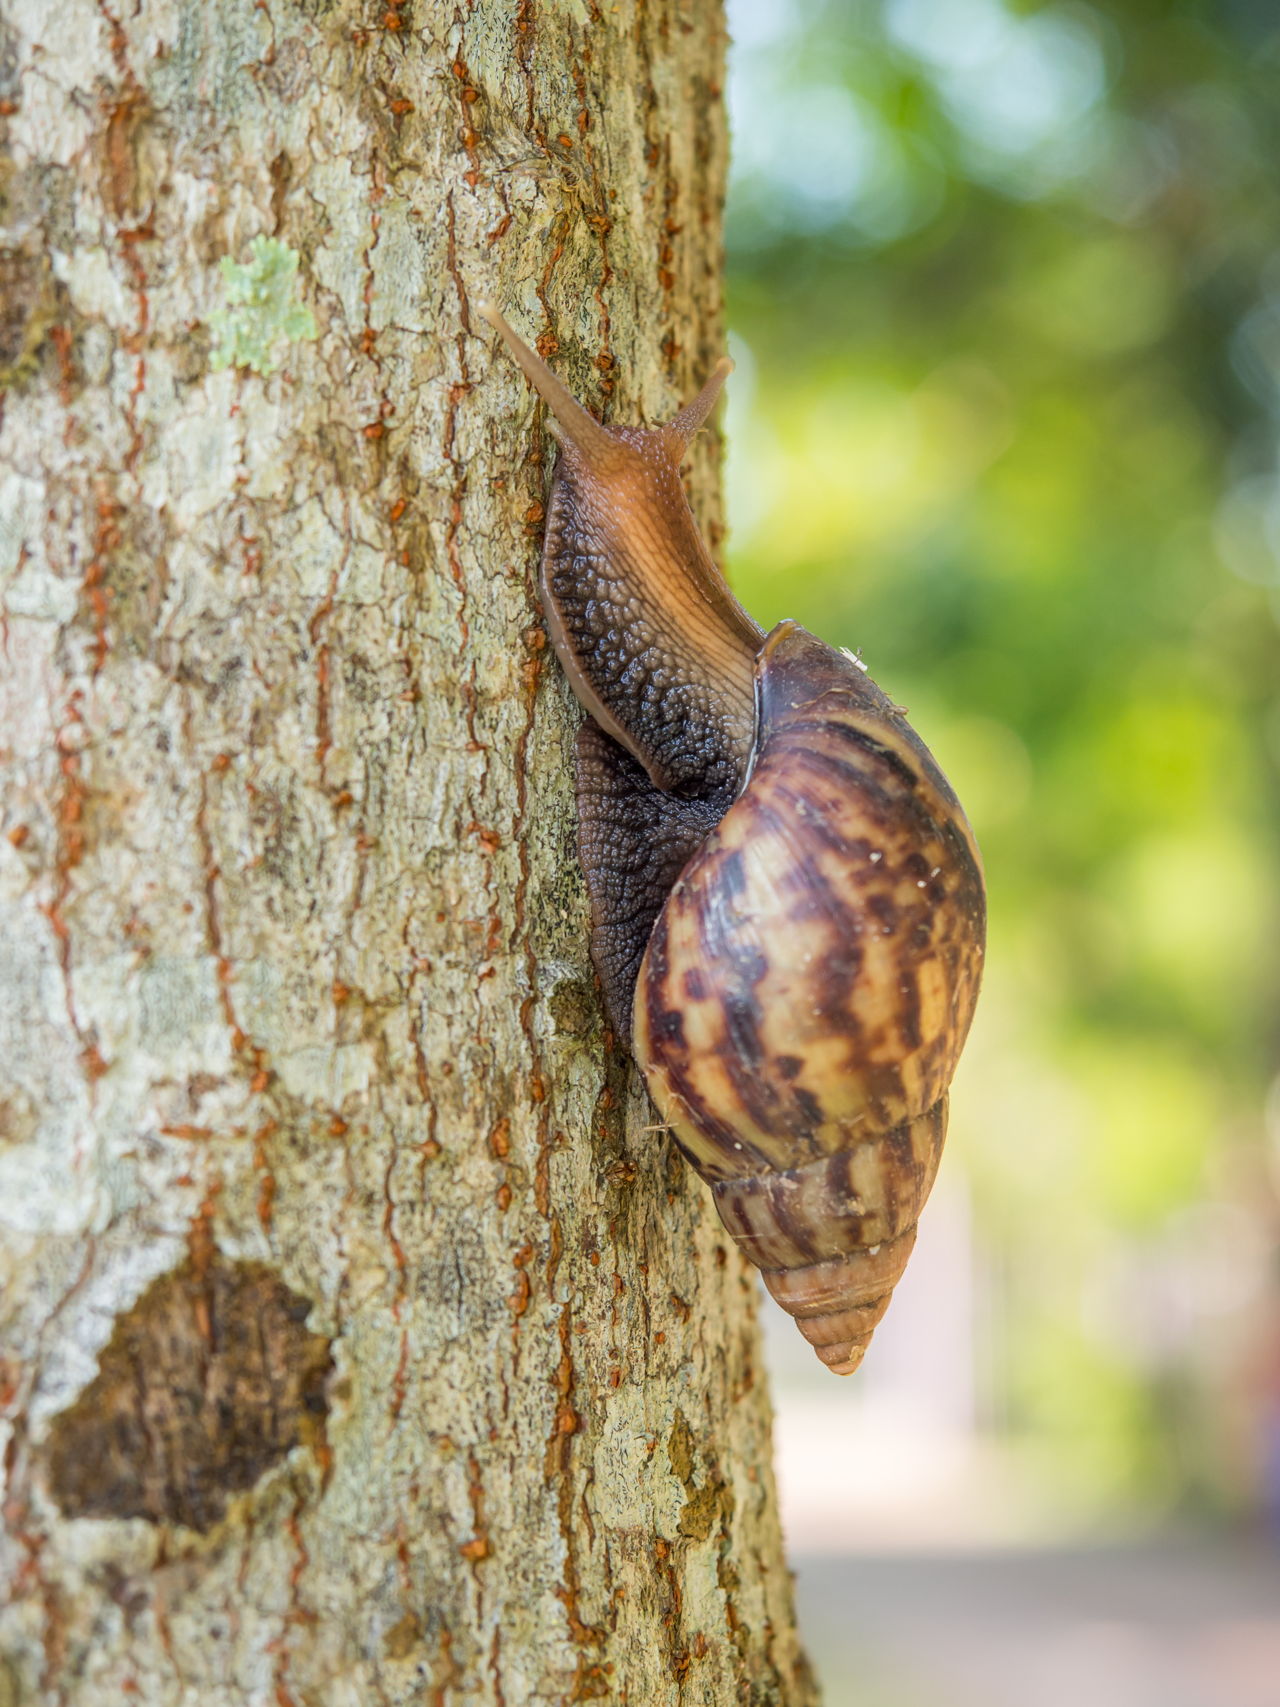 A Shell of a Home: Facts About the Ear-less Snails